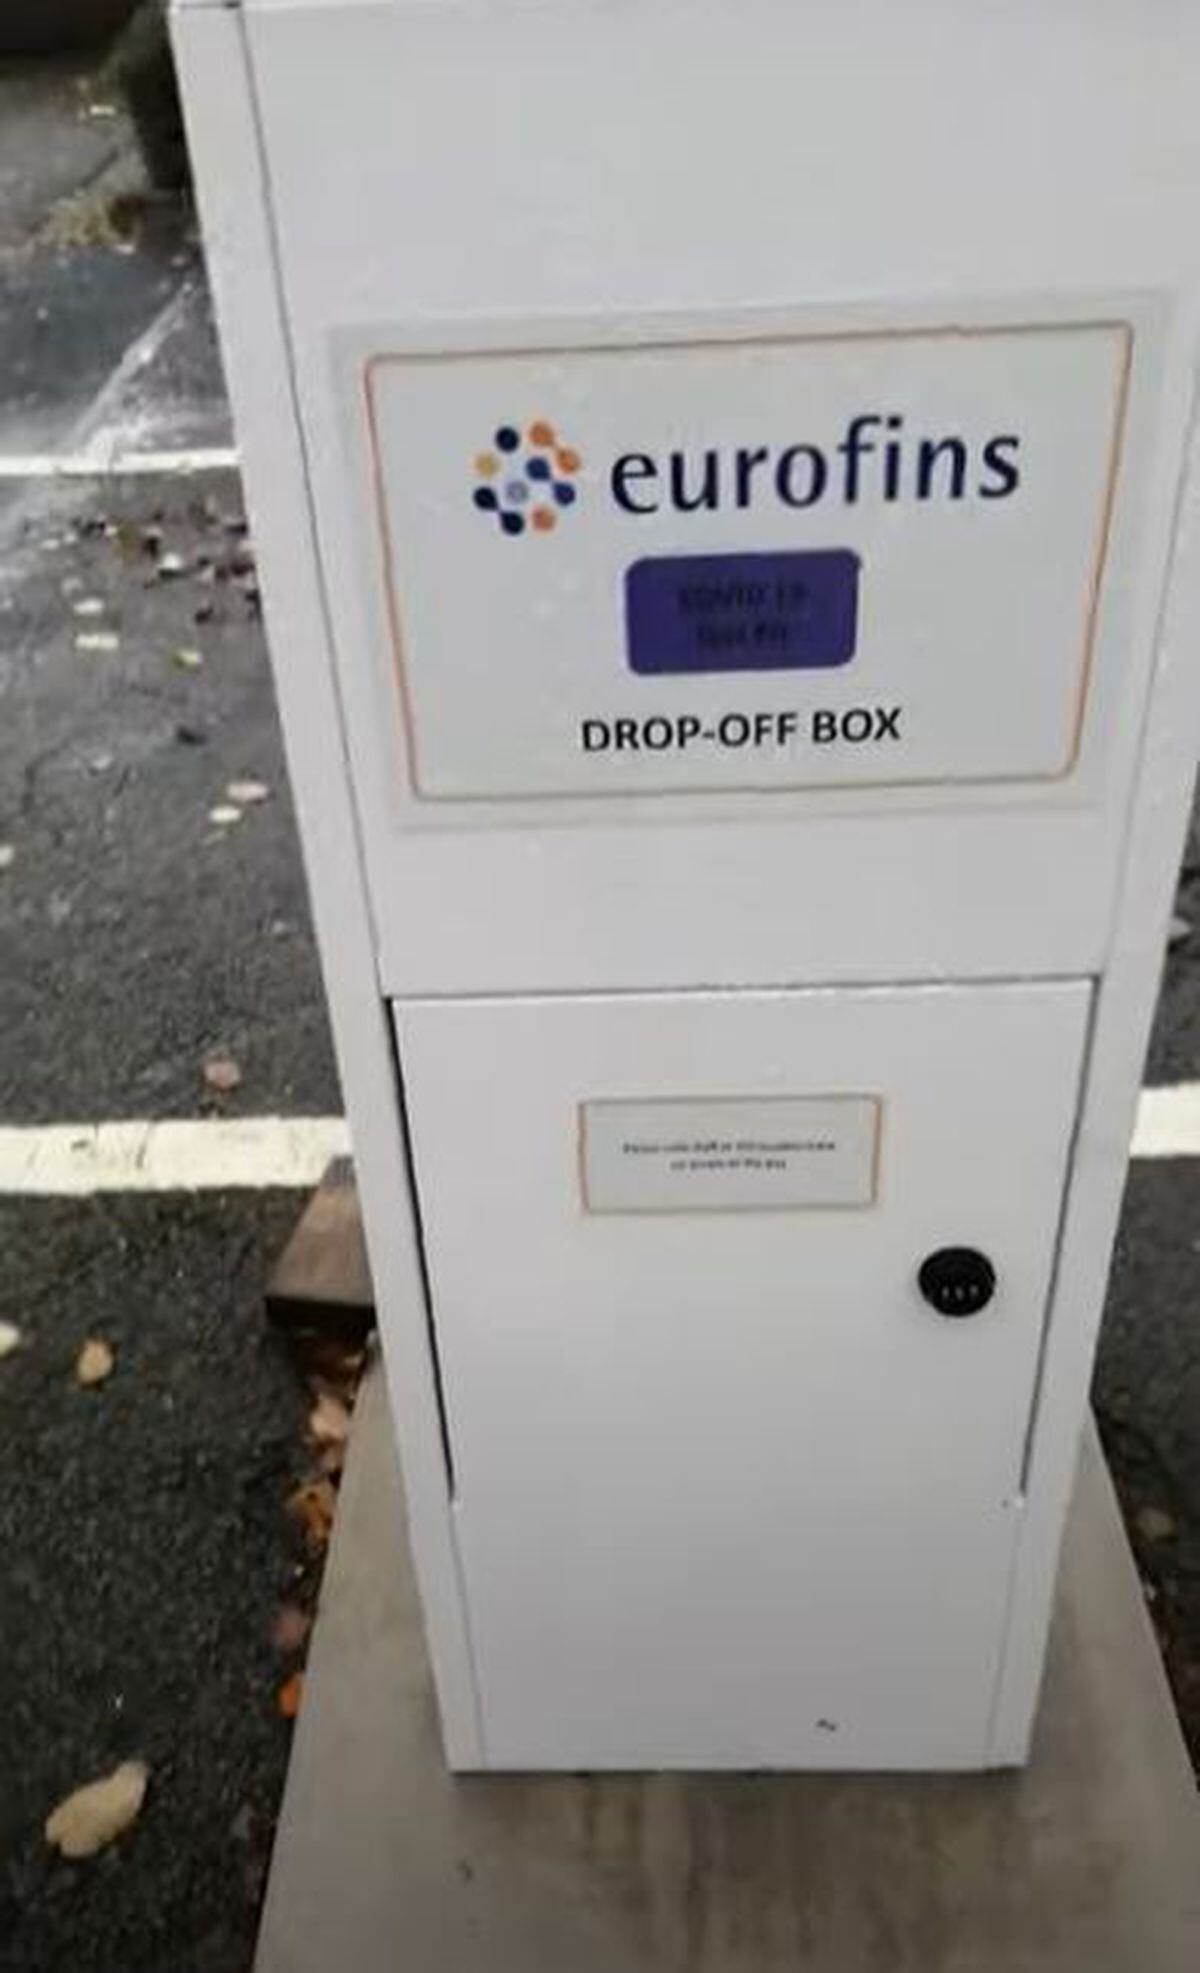 This drop-box was also left in the carpark. Video: Timothy Draycott